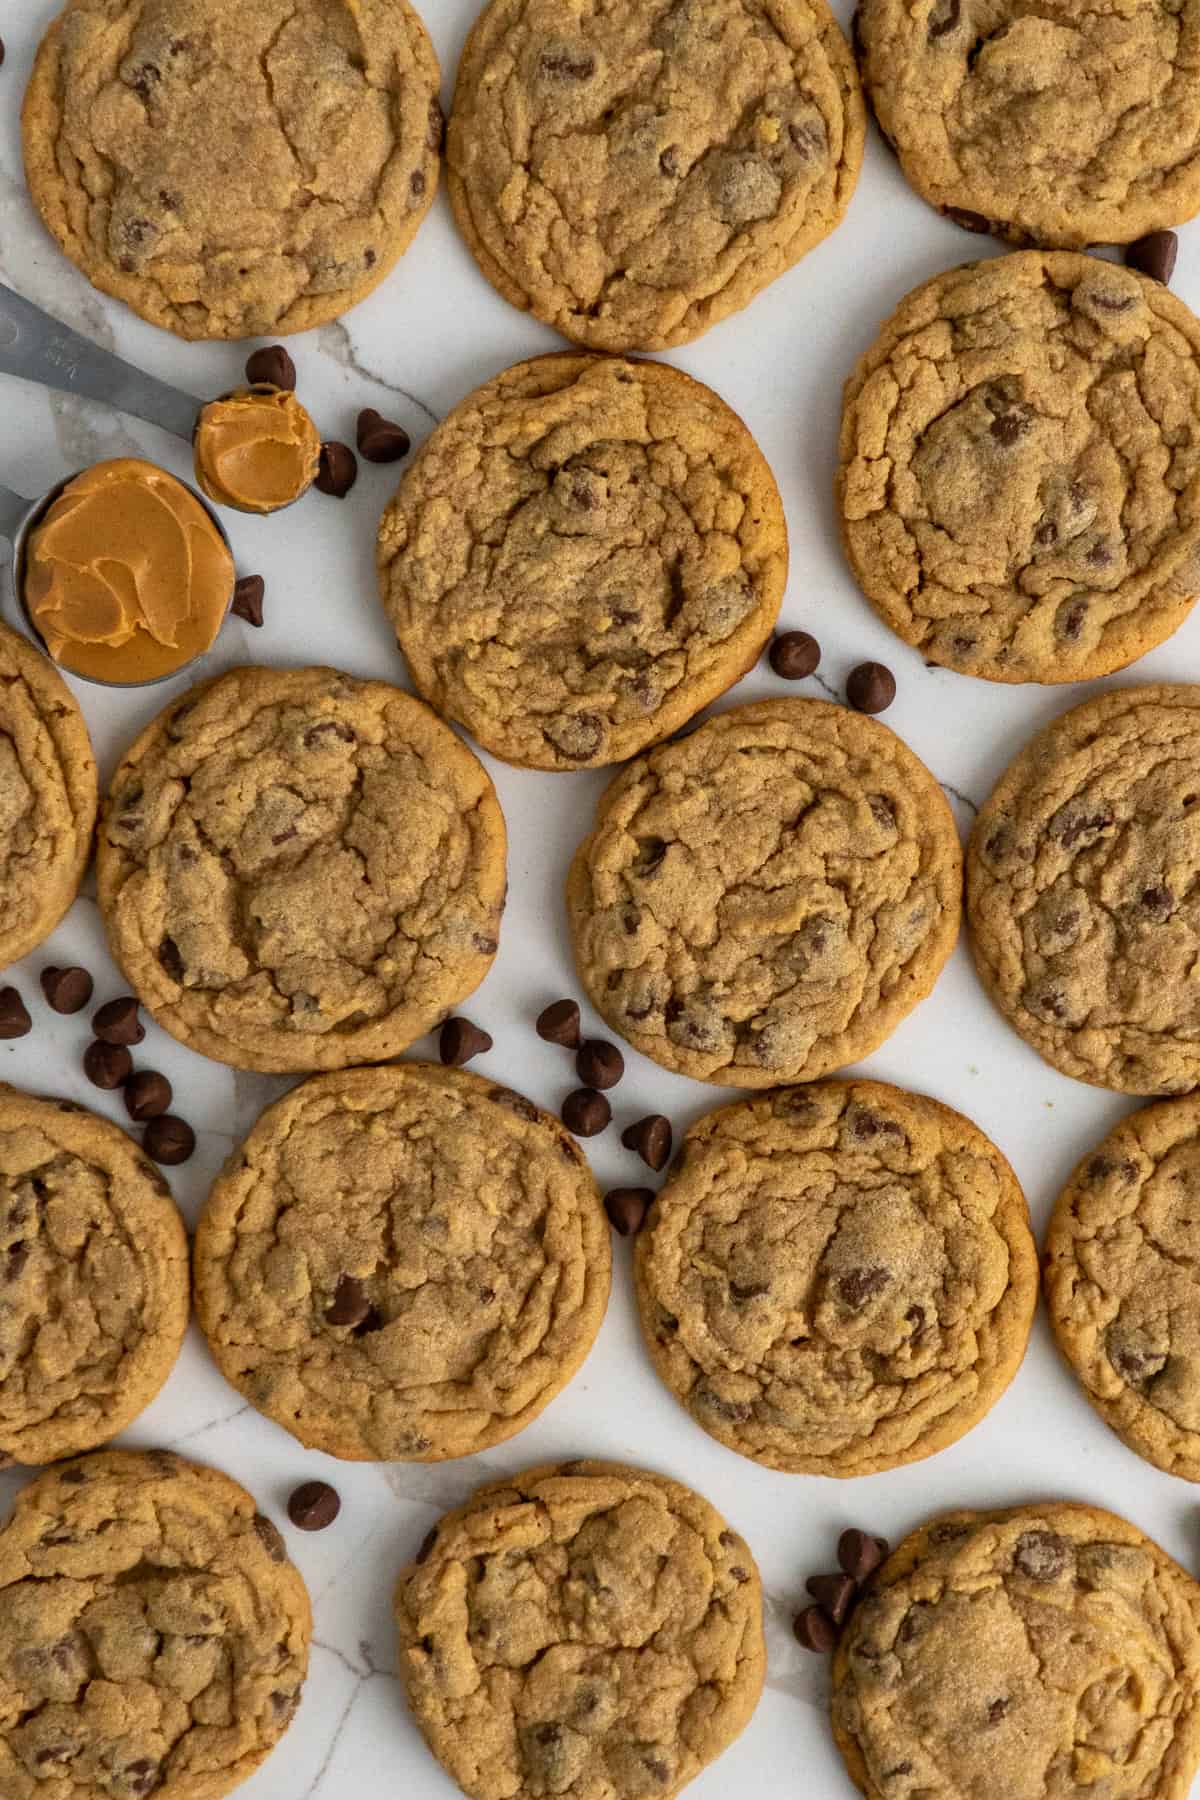 Peanut butter chocolate chip cookies on a marble countertop.